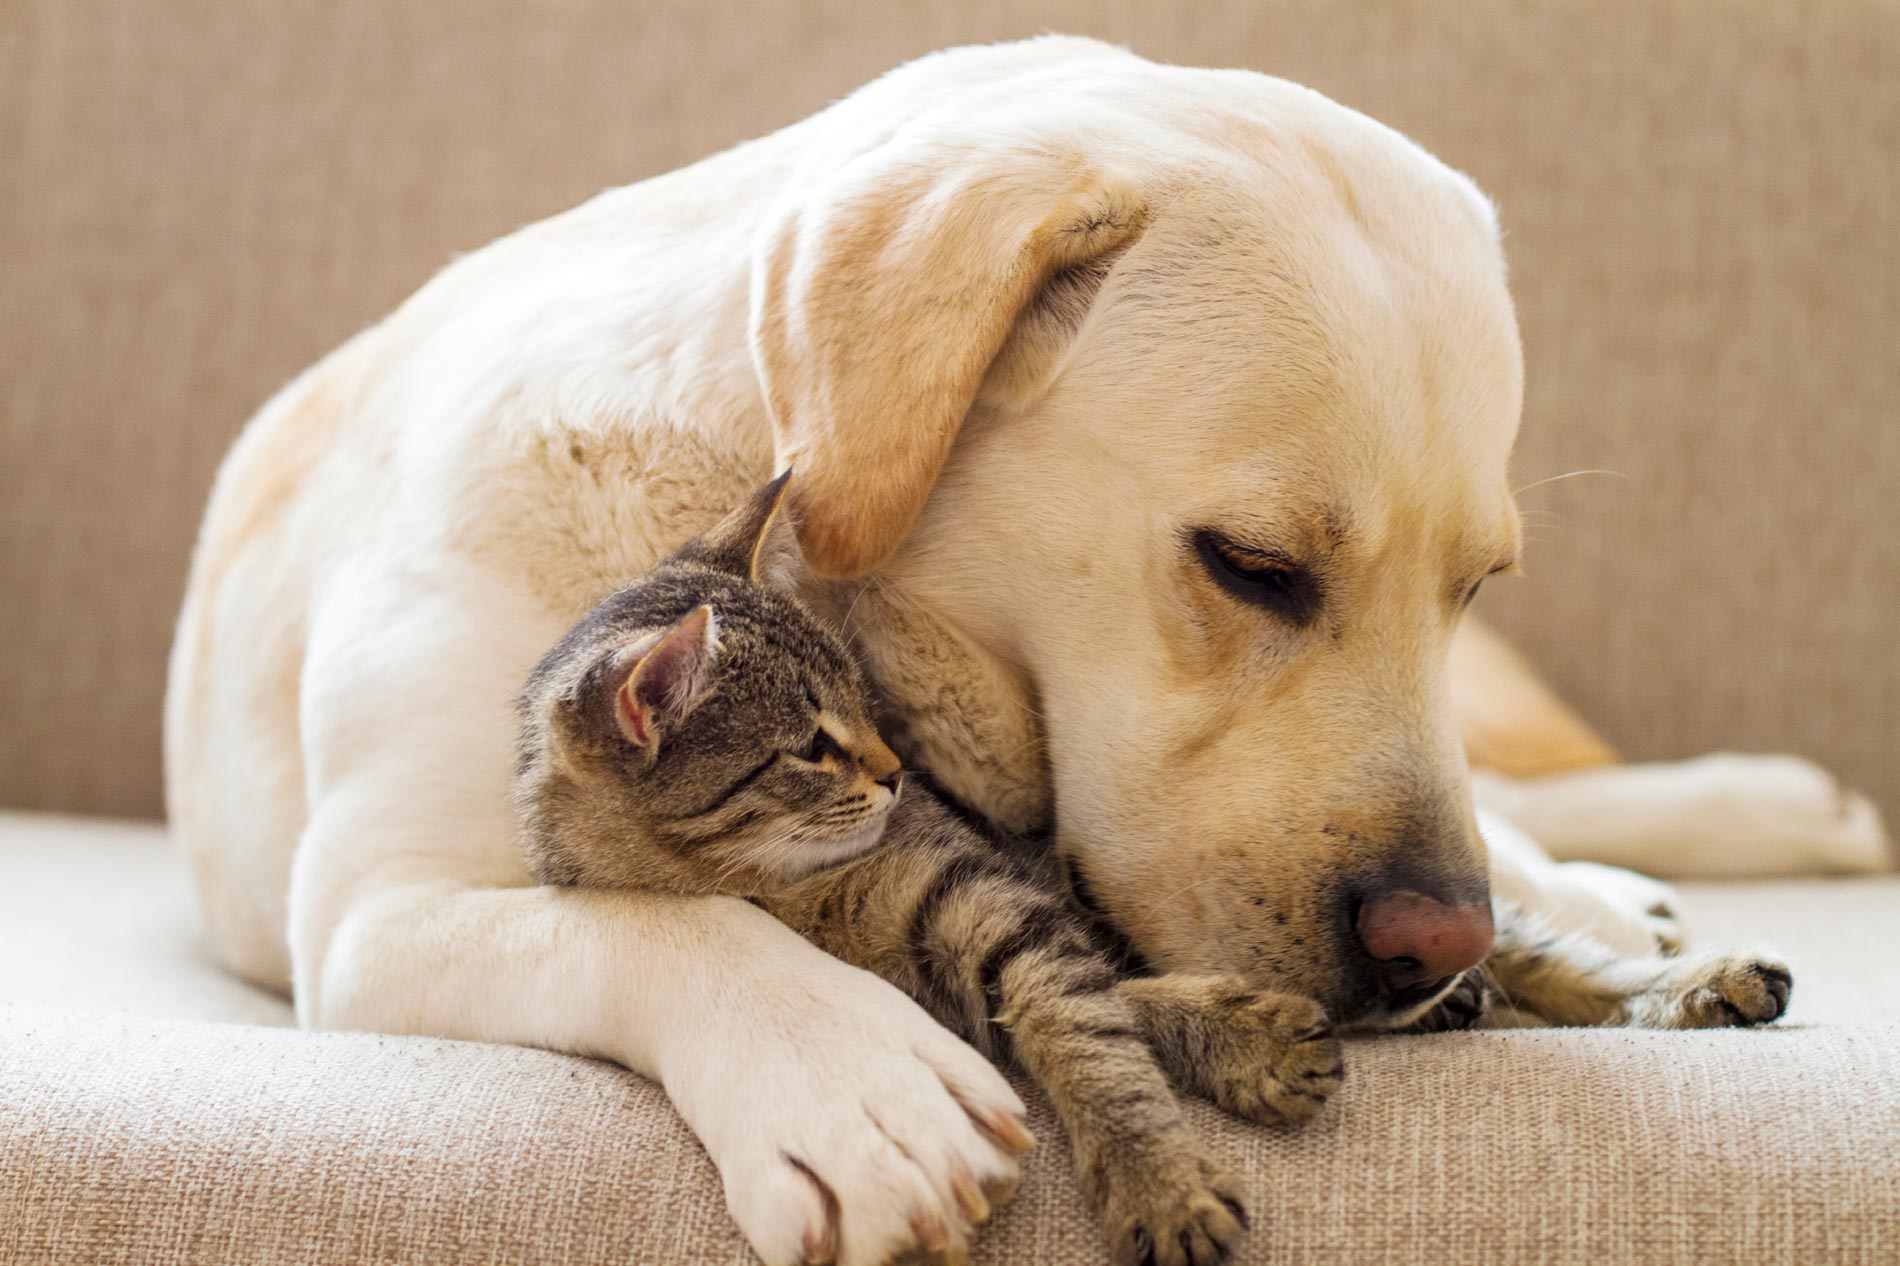 Yellow lab snuggles a kitten on a couch